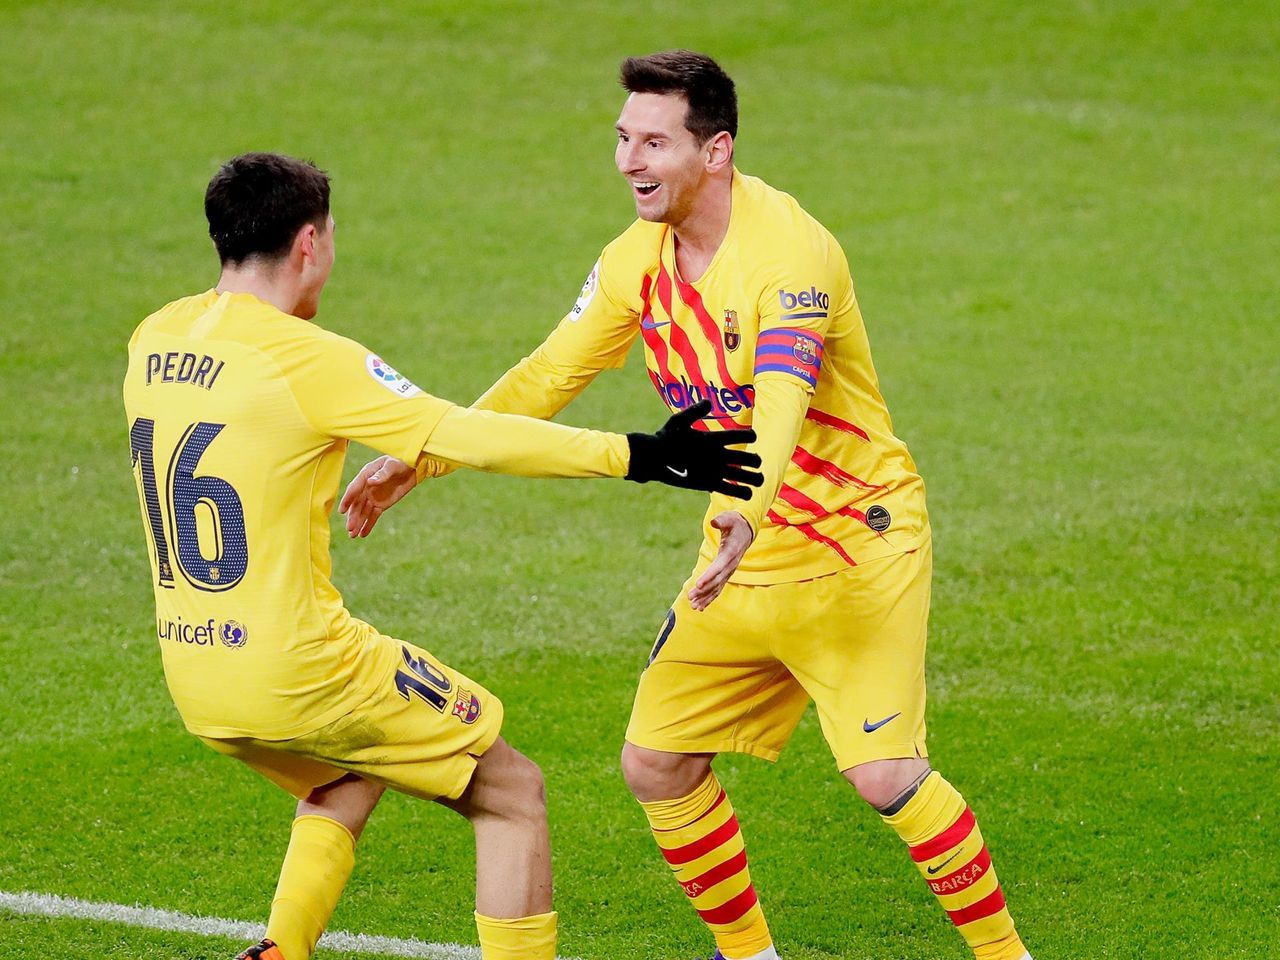 Lionel Messi and Pedri magic see Barcelona beat Athletic Club and move into third